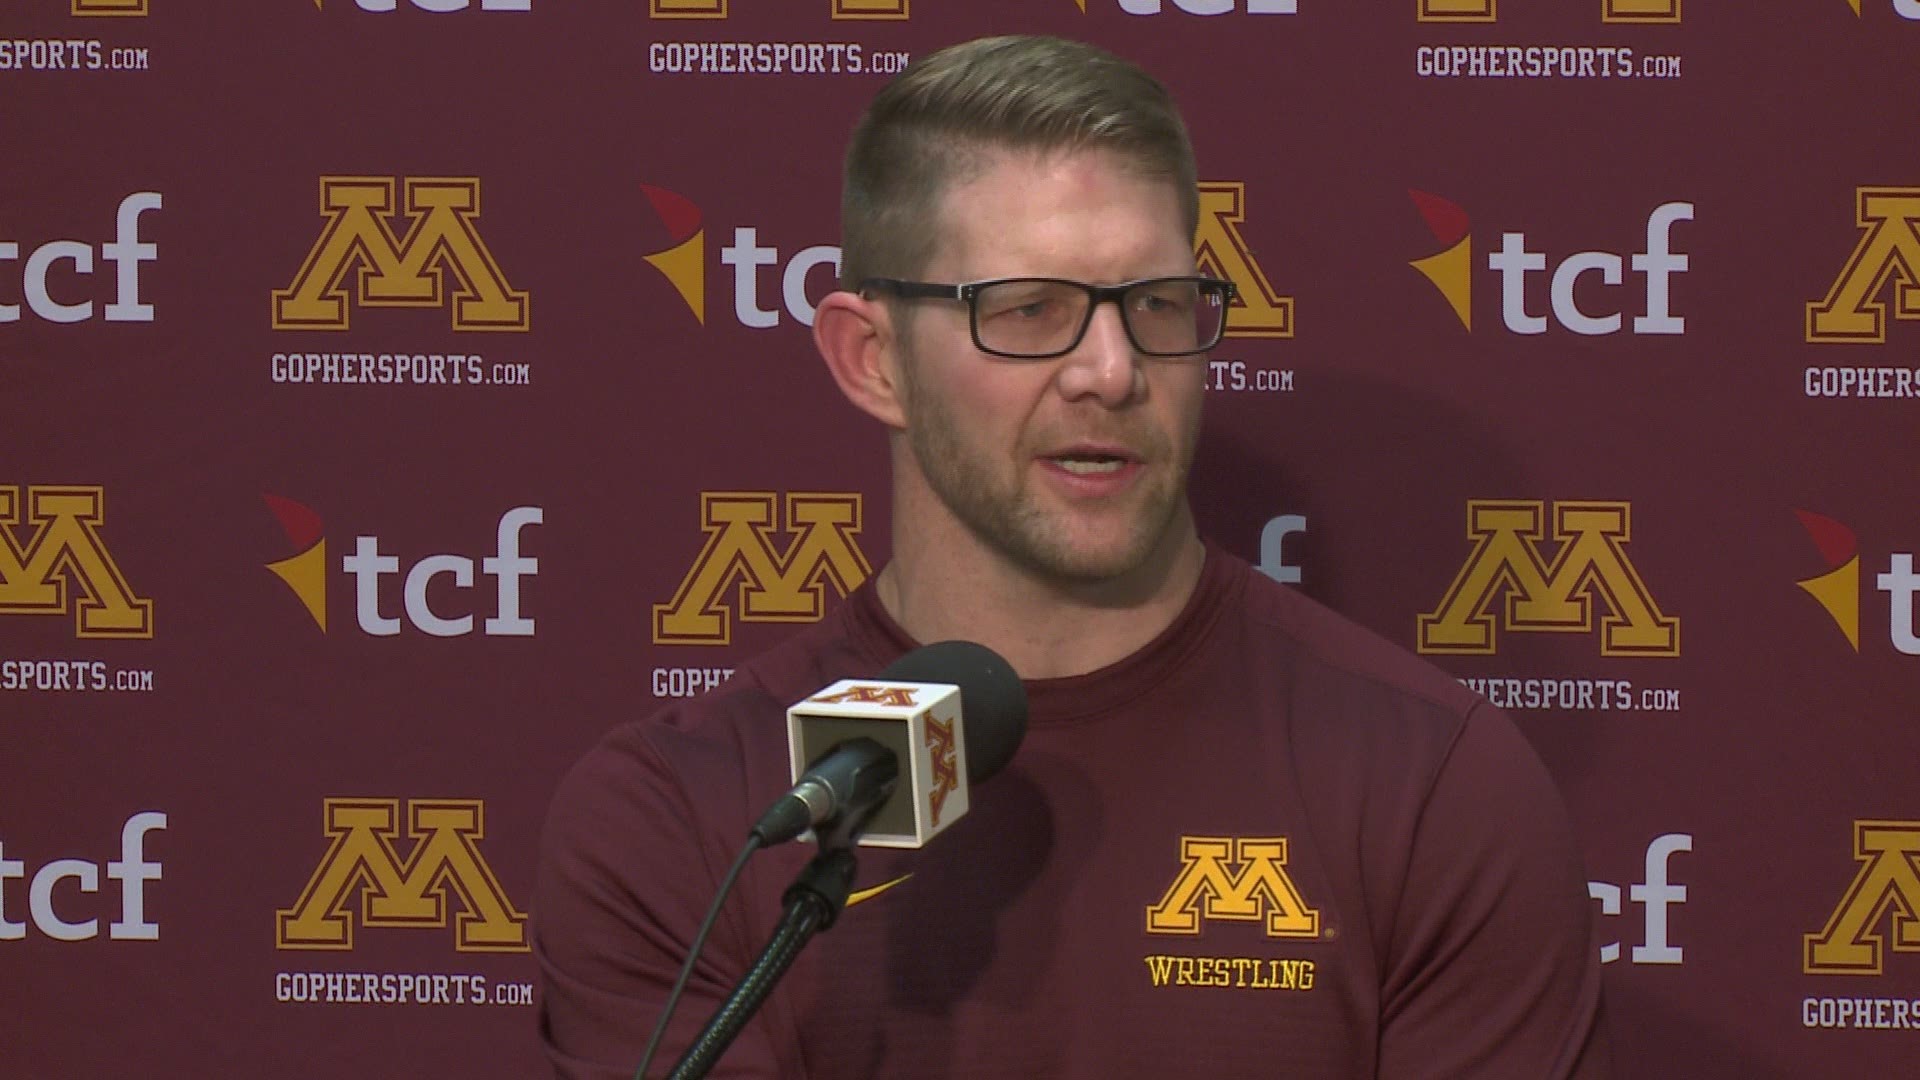 The Gophers wrestling team is looking to make a splash at the Big Ten Championship on Saturday. Hear how the tournament is shaping up.